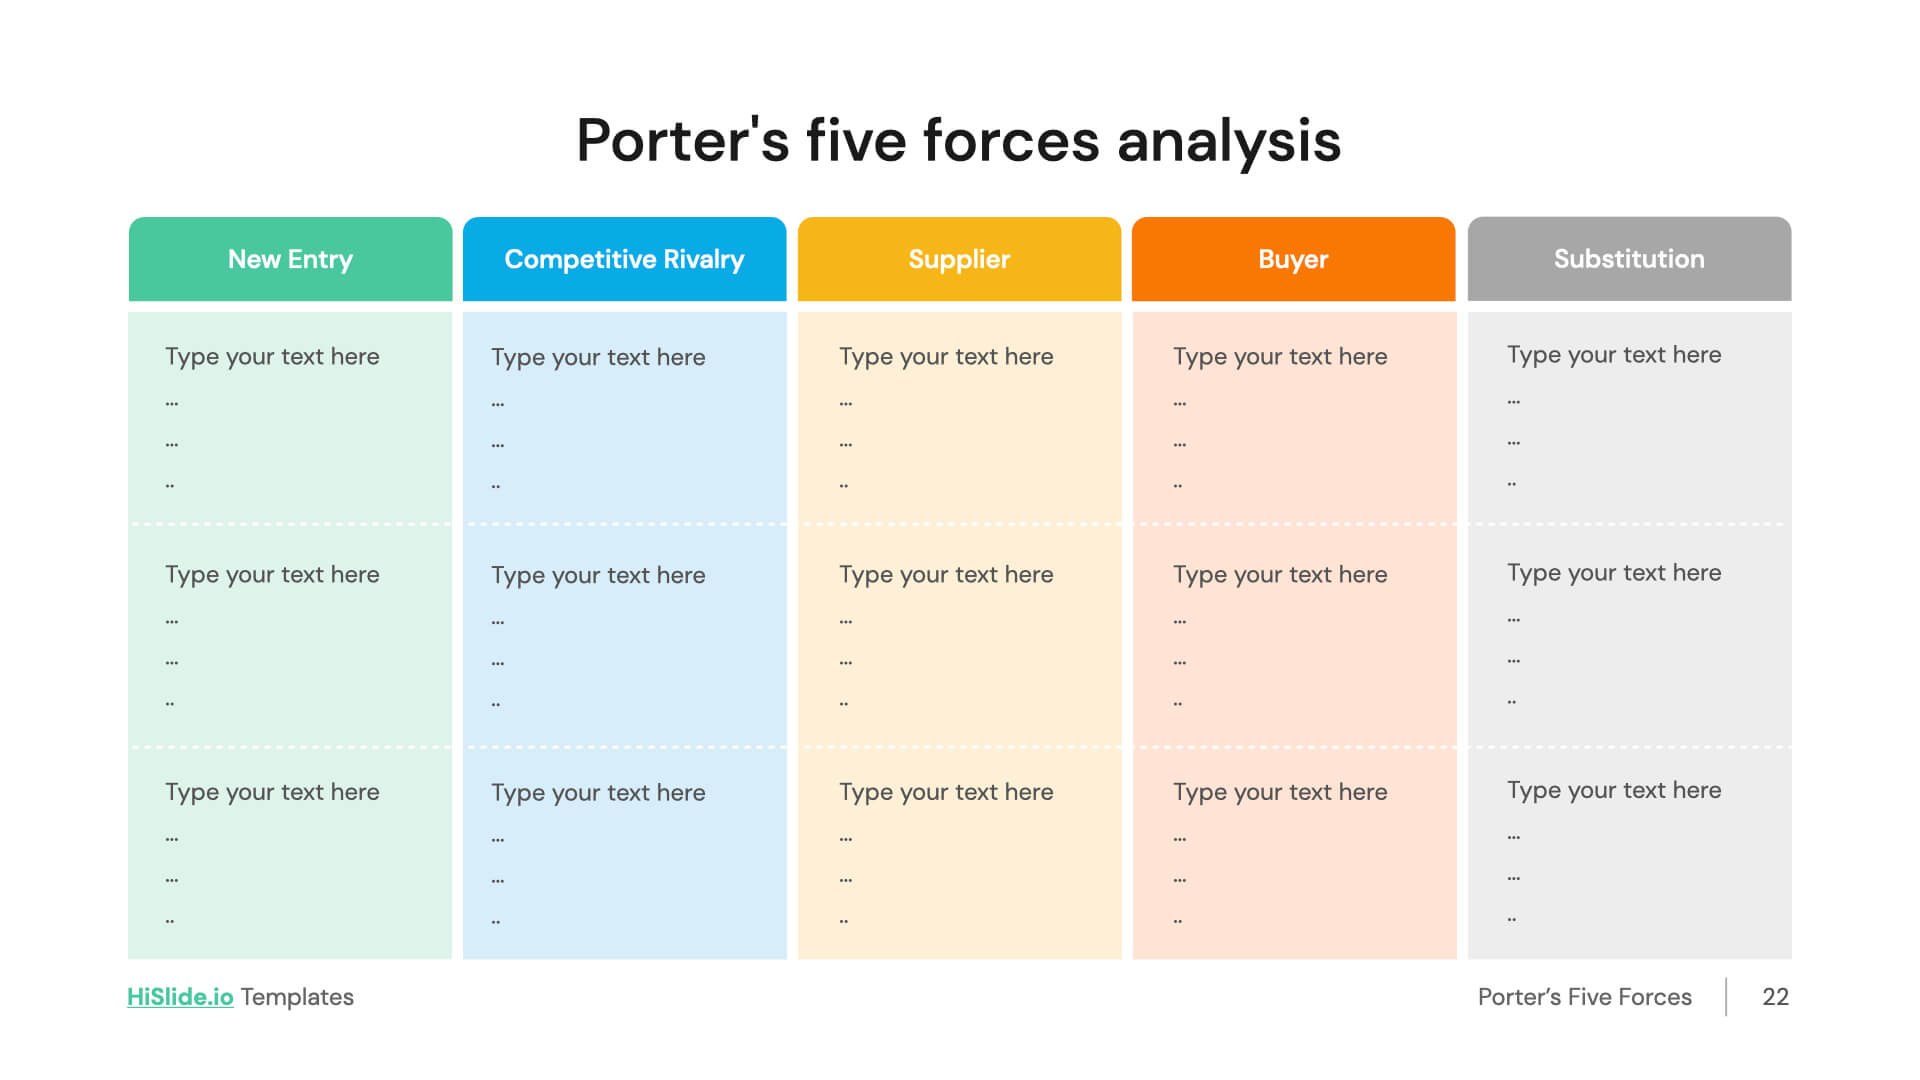 Free Porters Competitive Analysis